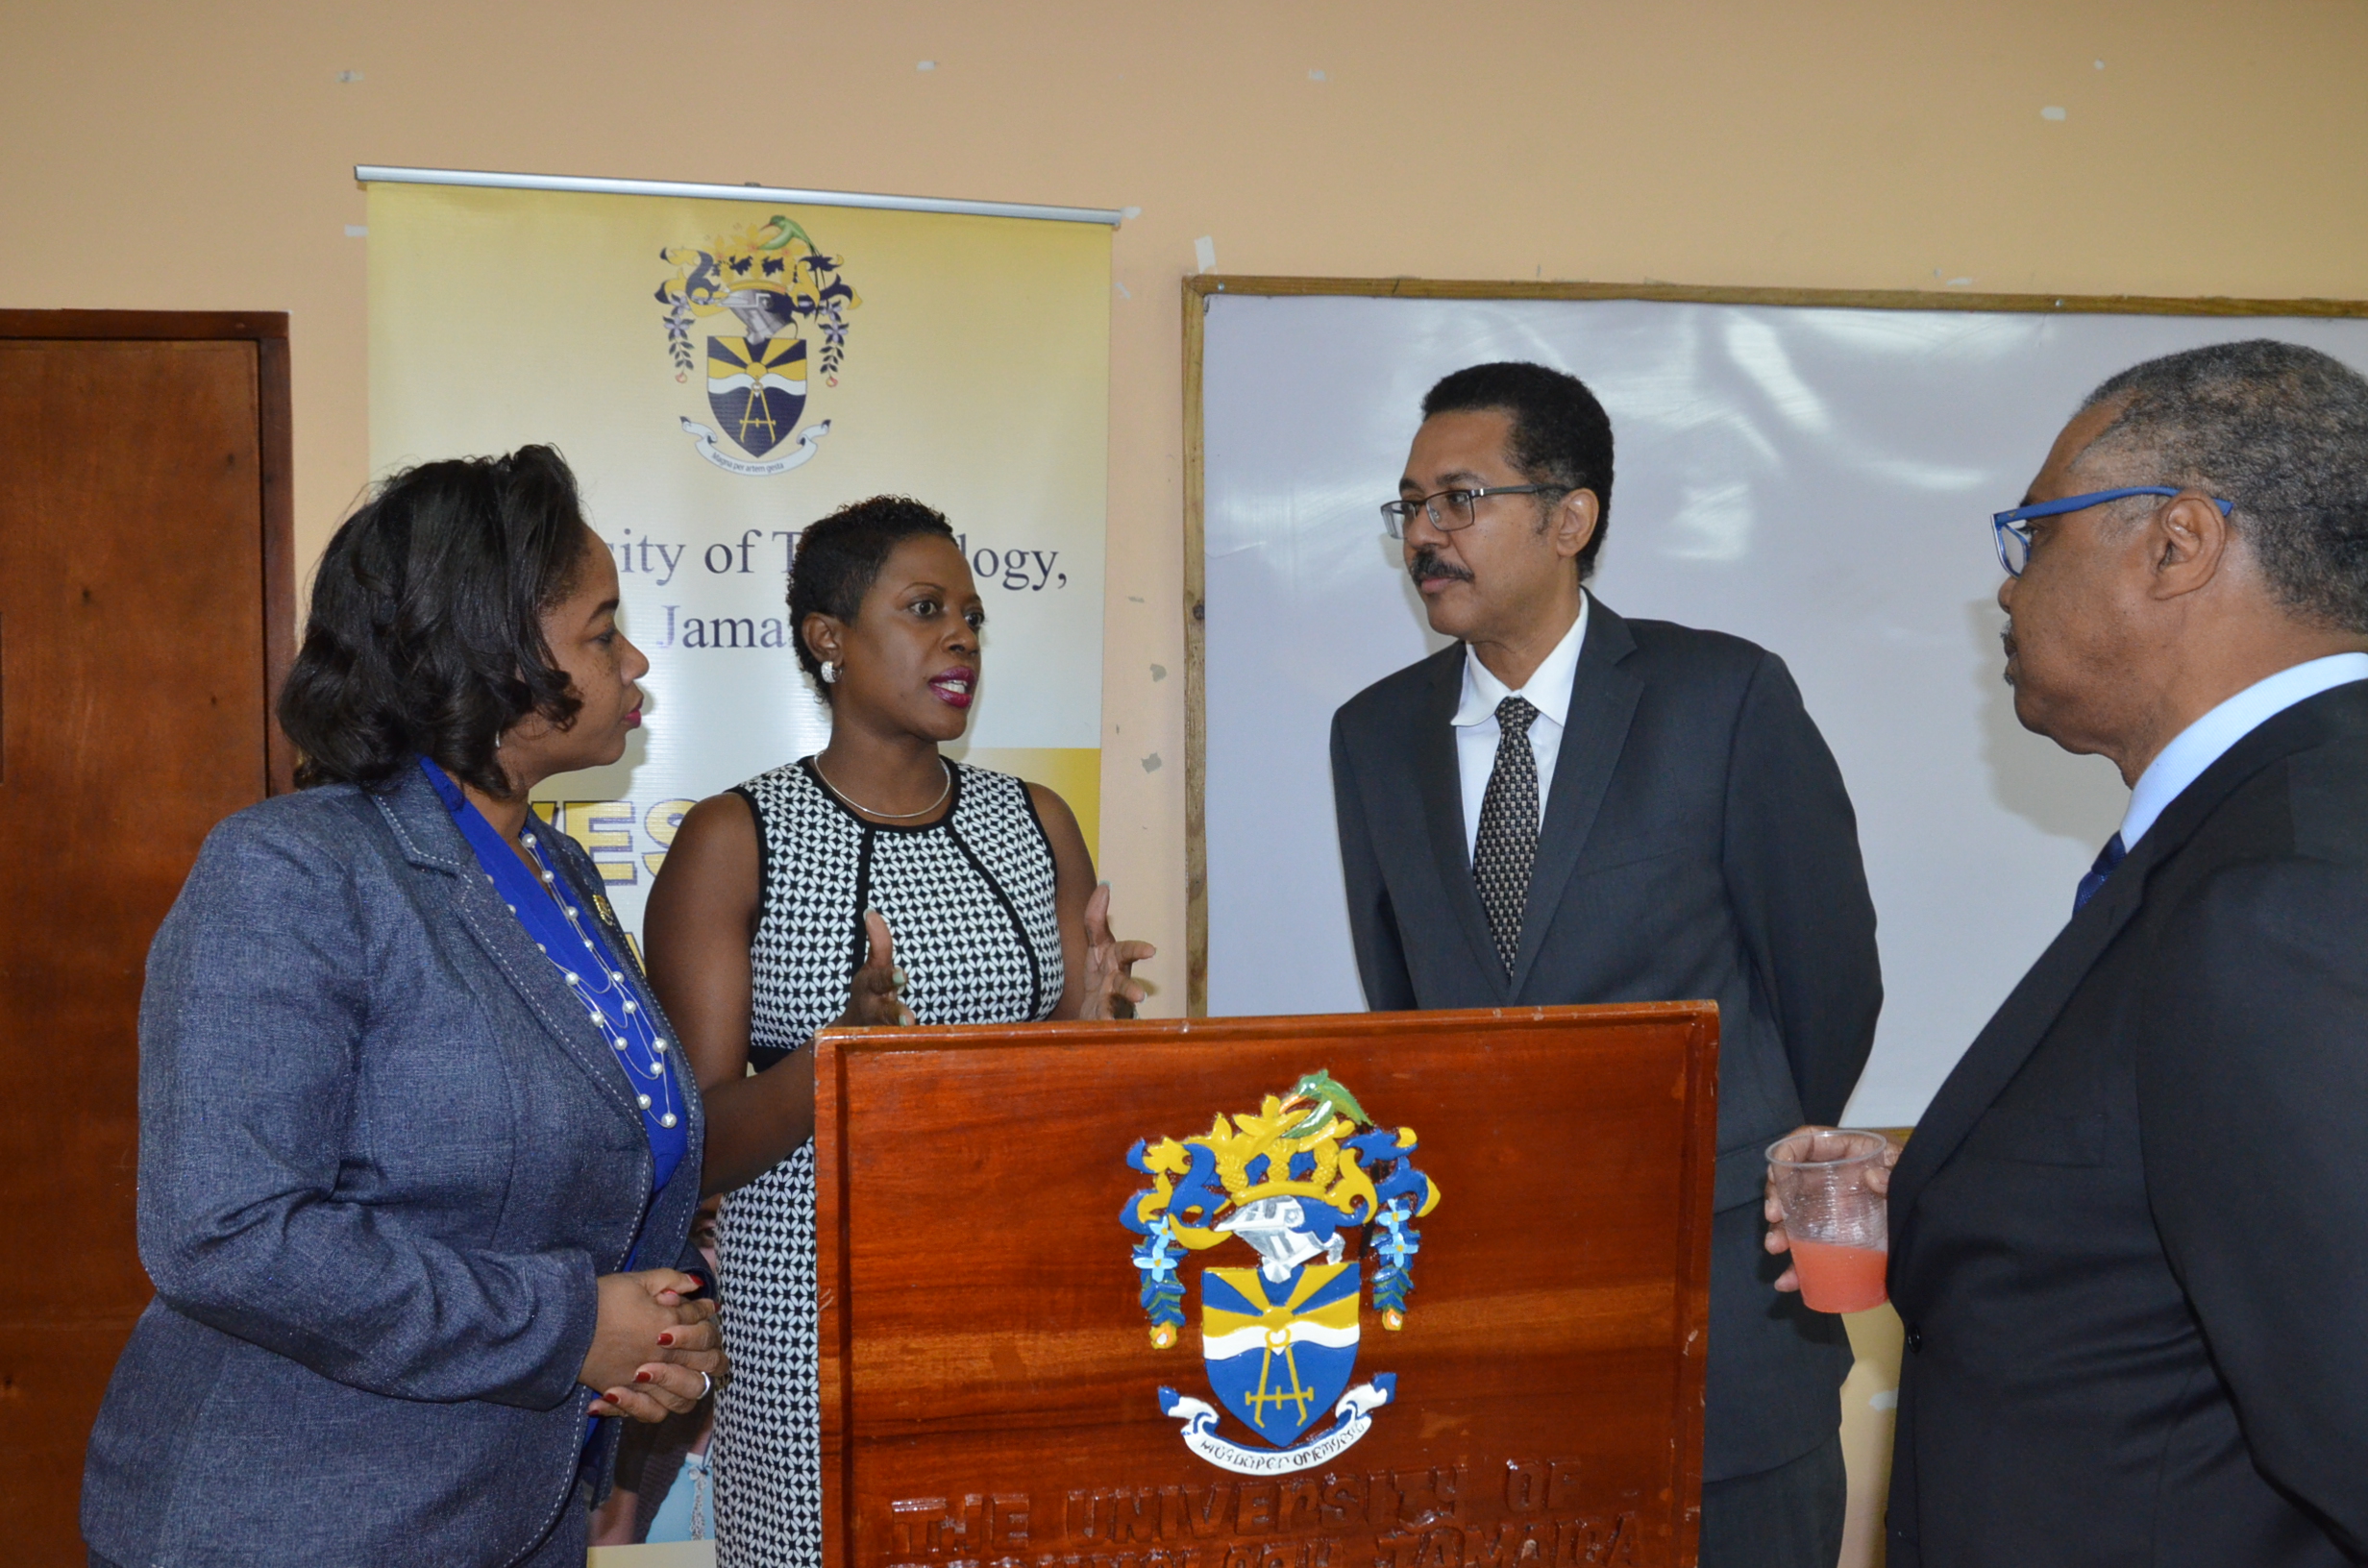 Western Campus must be ‘a strong foundation for UTech, Jamaica’ says Prof. Vasciannie  